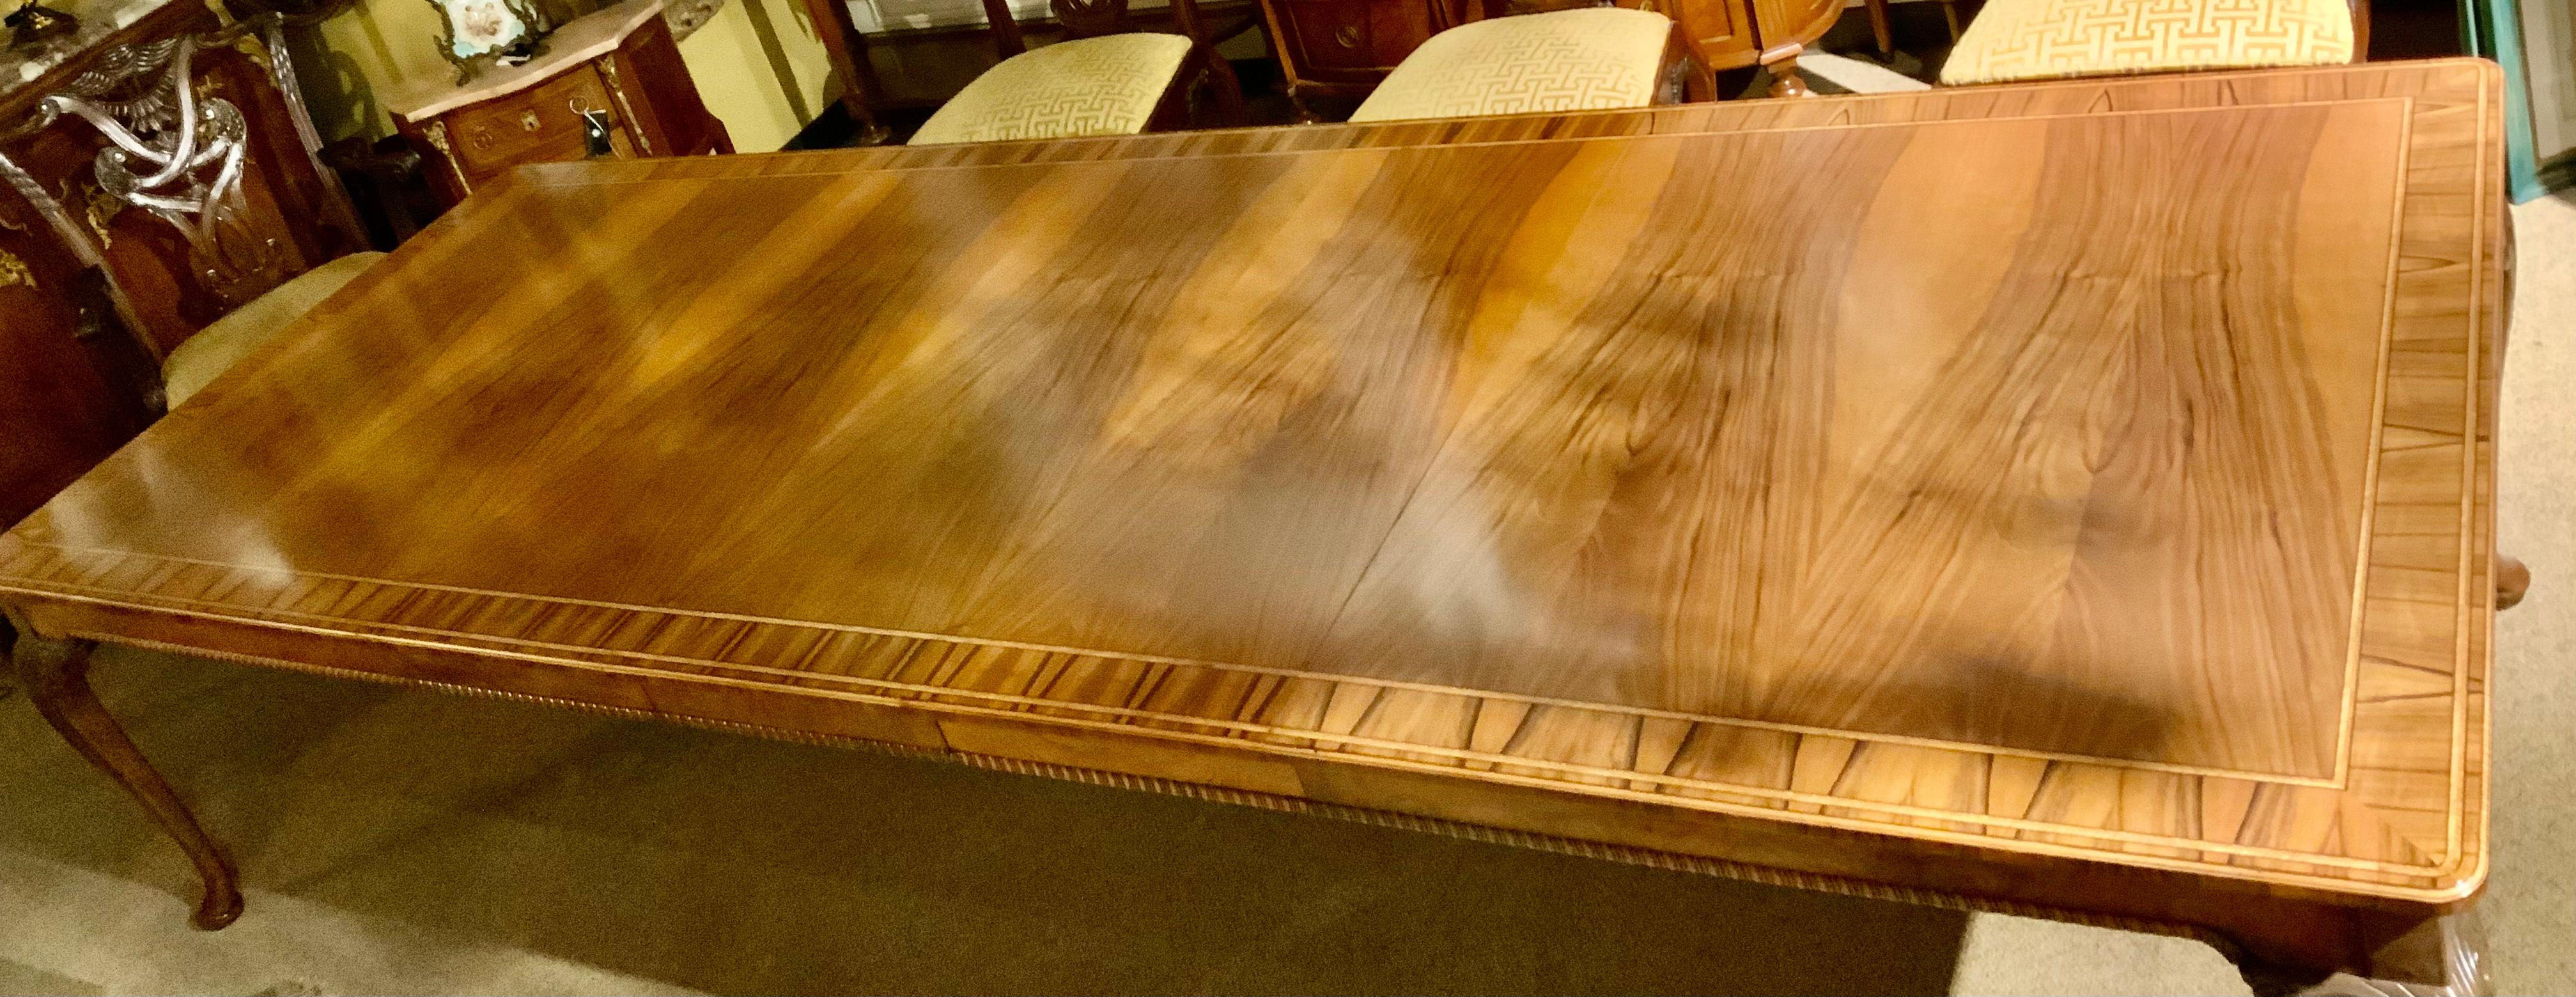 The top is book-matched veneers and has a banded edge
Raised on cabriole legs with acanthine-carved knees ending in 
Pad Feet. The color is a honey hue with original finish and patina. It has three leaves which measure 17.5 inches each. The